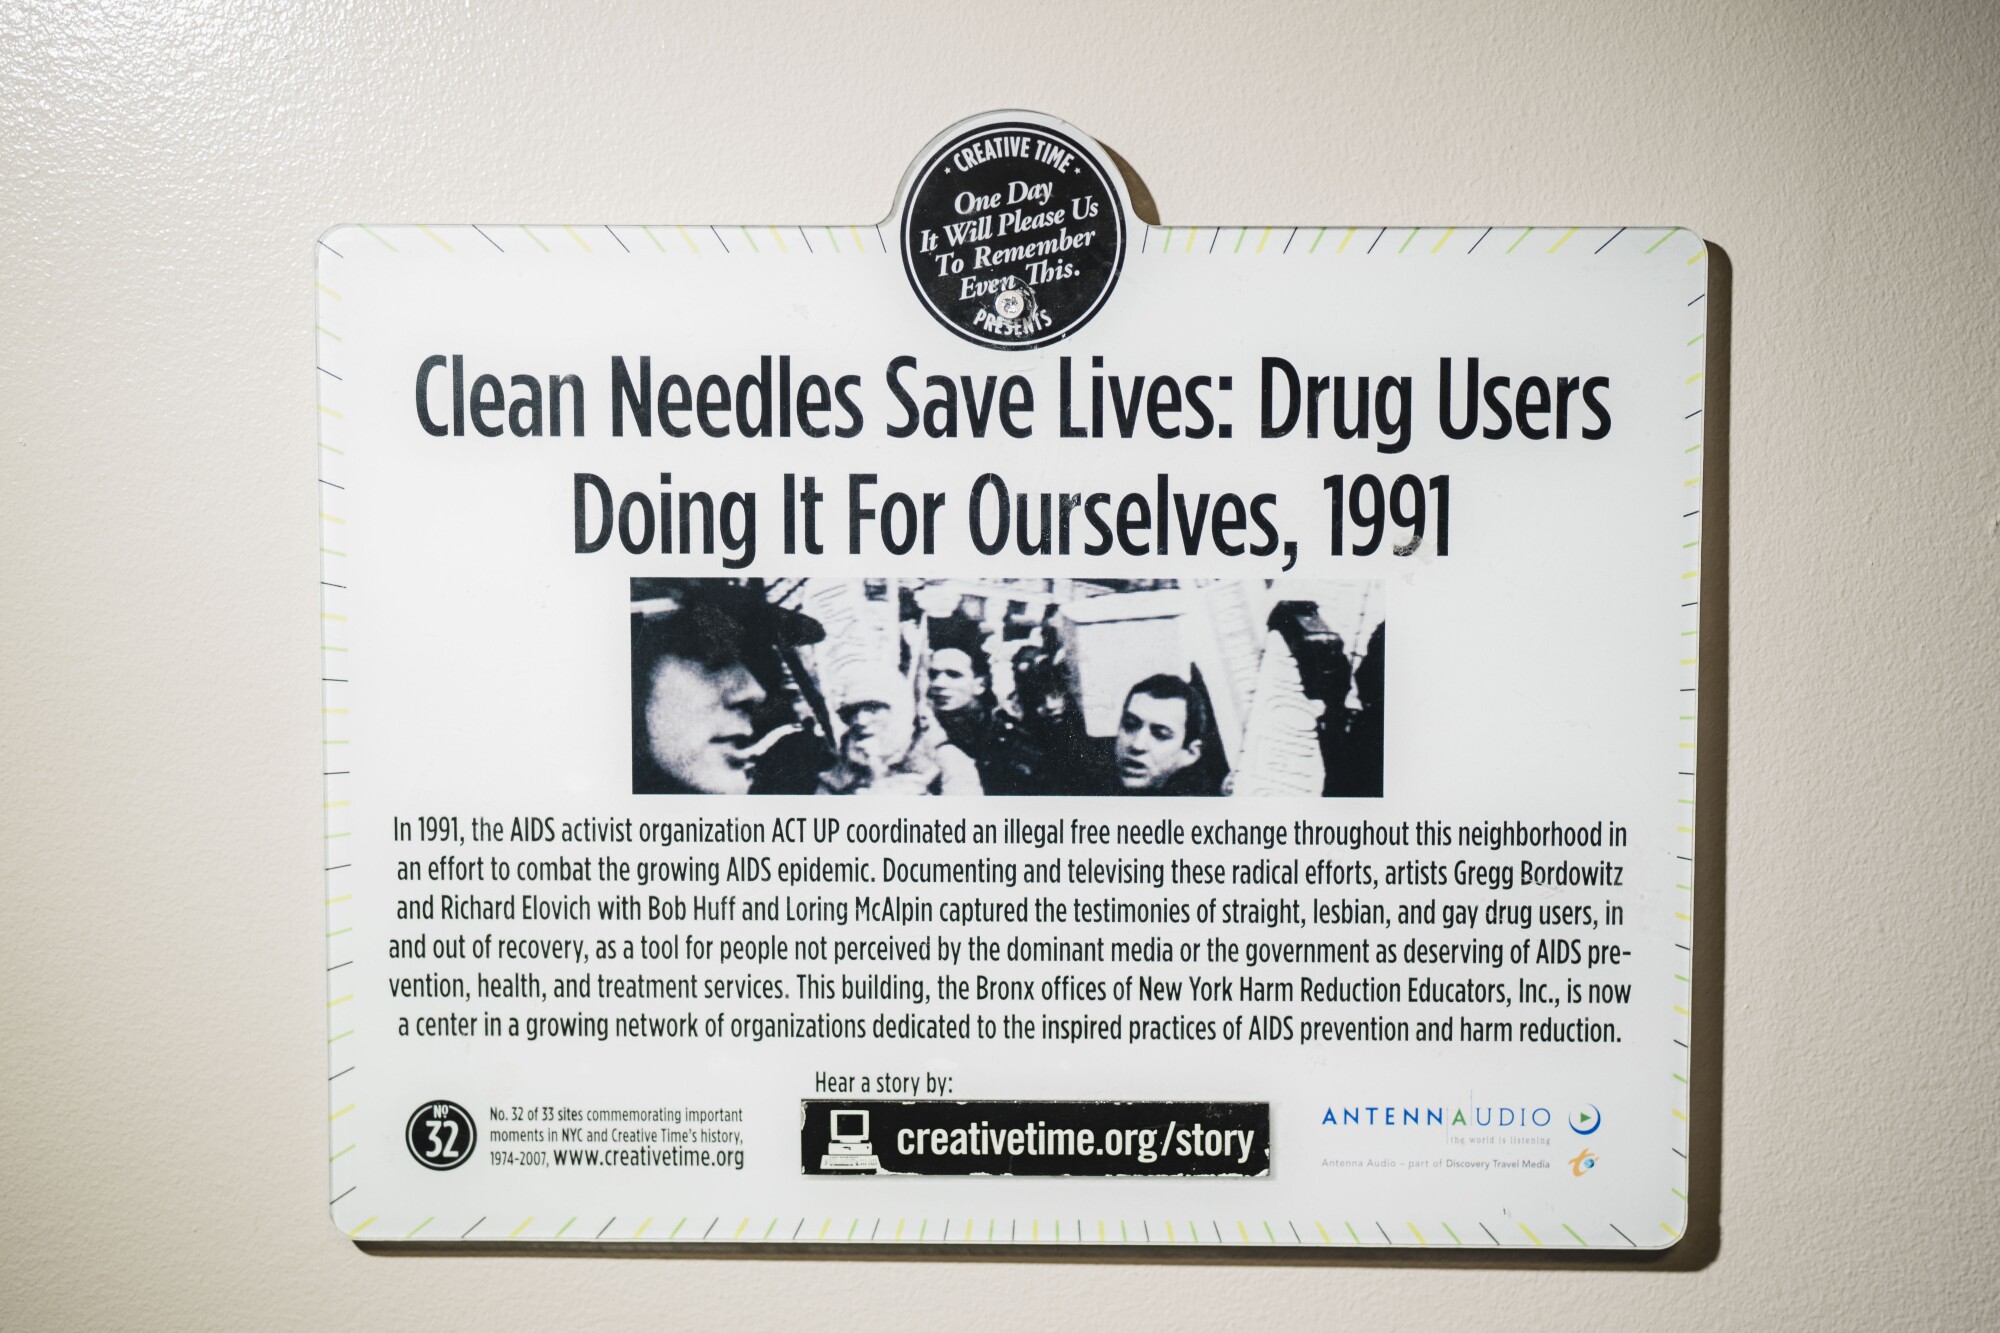 A sign supporting clean needles.